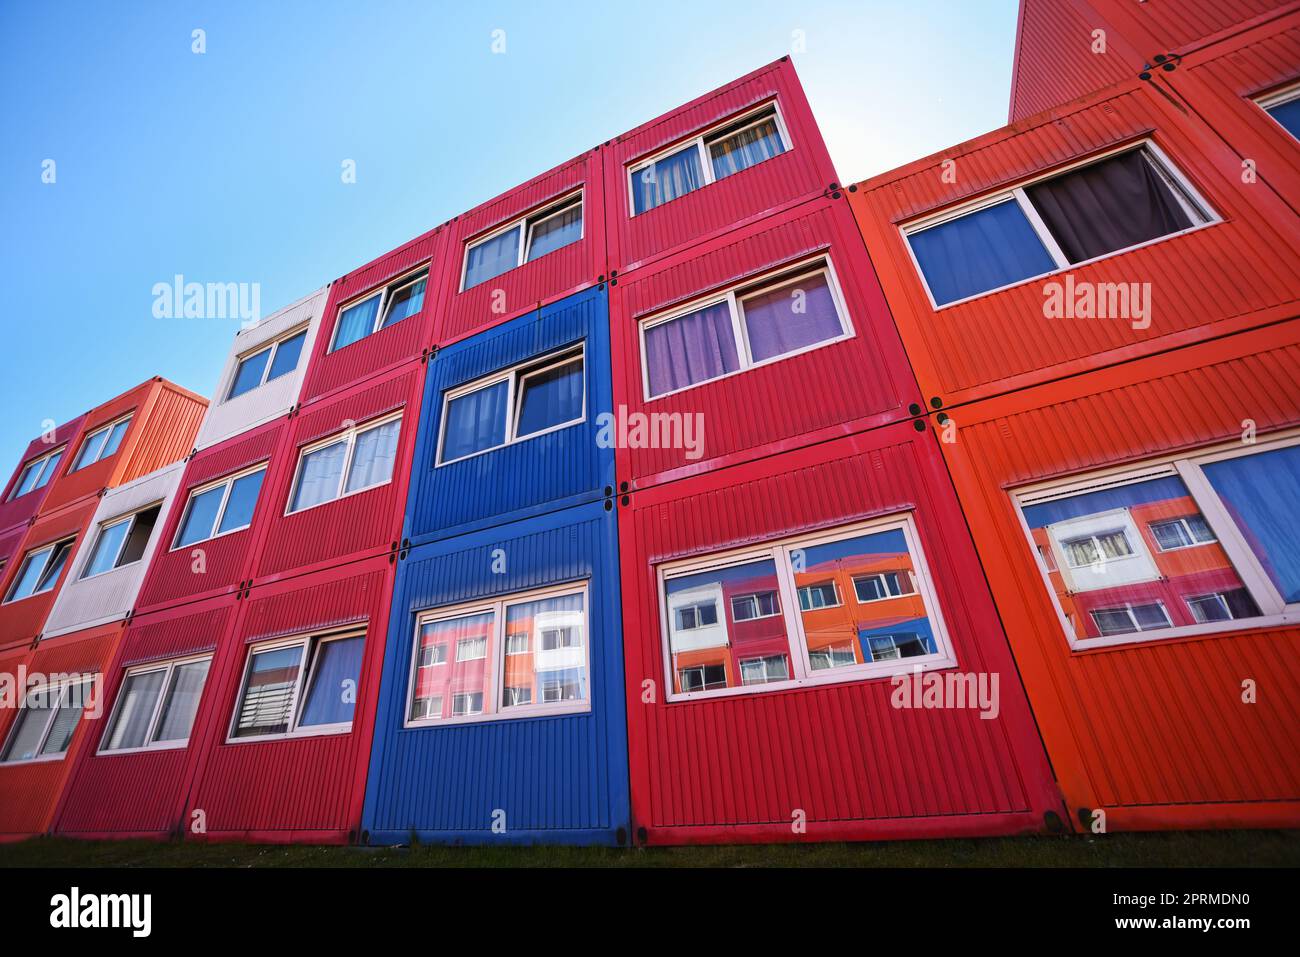 Colourful converted shipping container units used for student housing in Amsterdam Buiksloterham district. Stock Photo